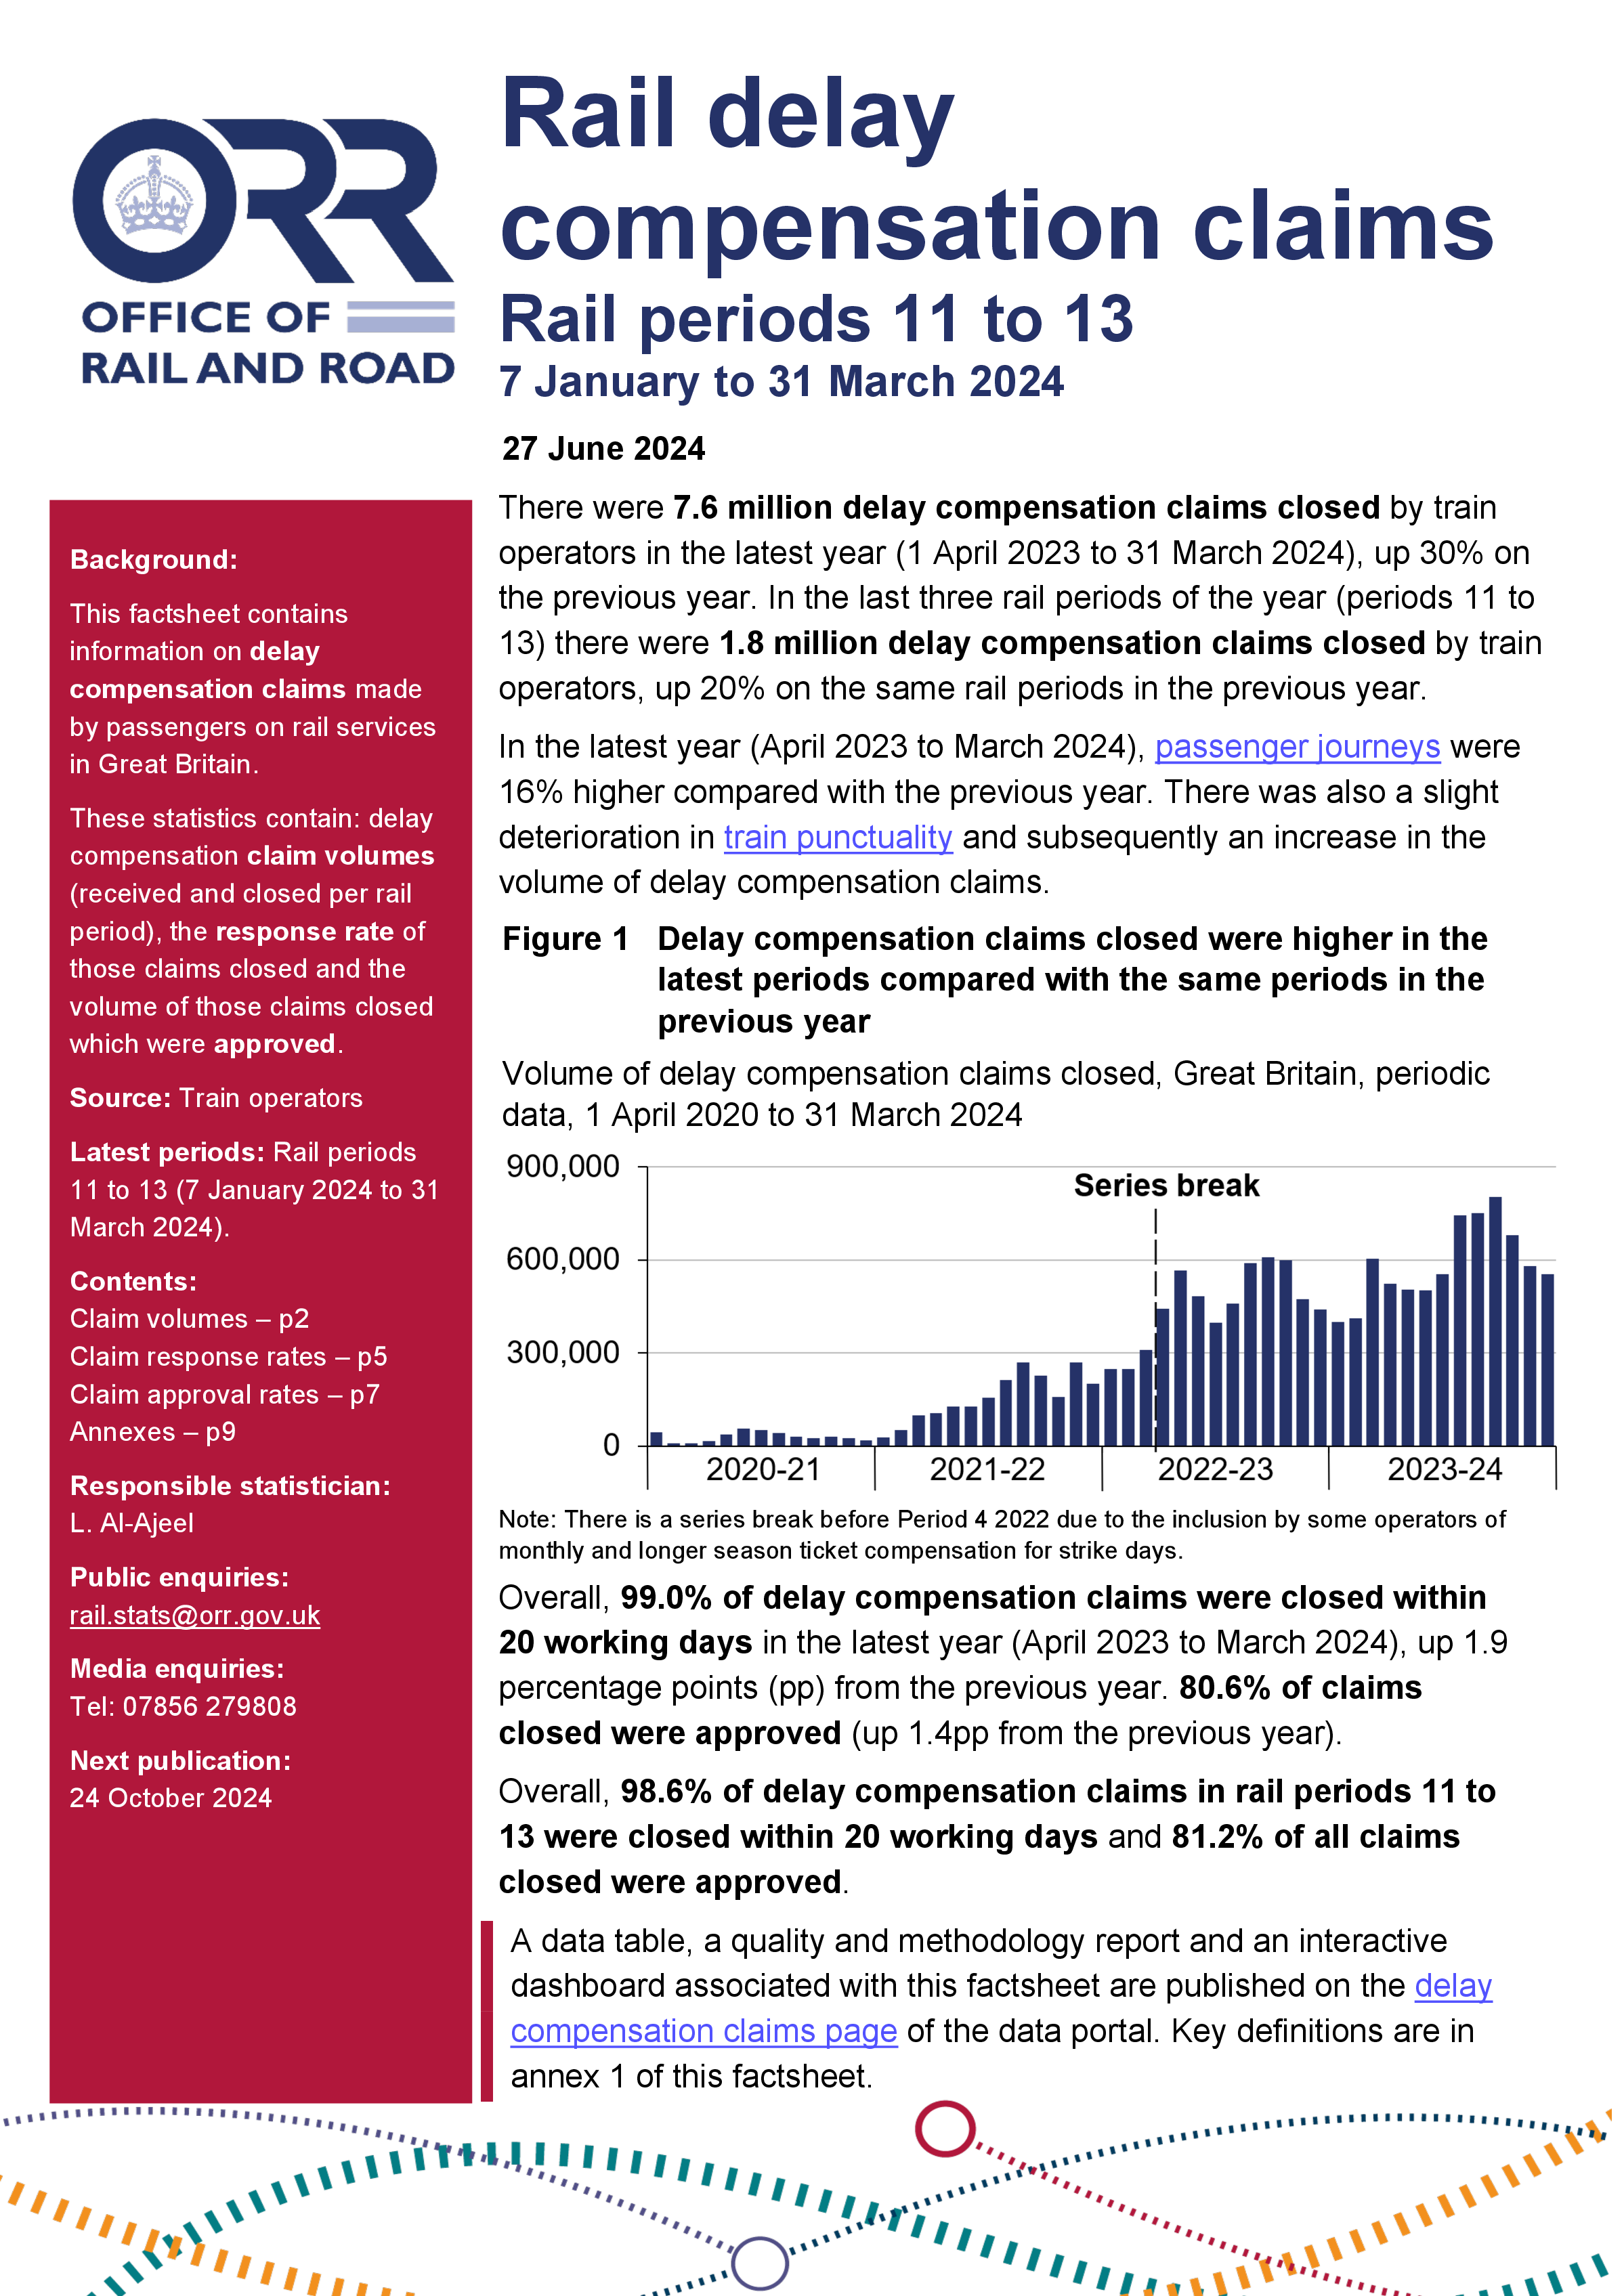 Delays compensation claims, rail periods 11 to 13 (7 January to 31 March 2024)